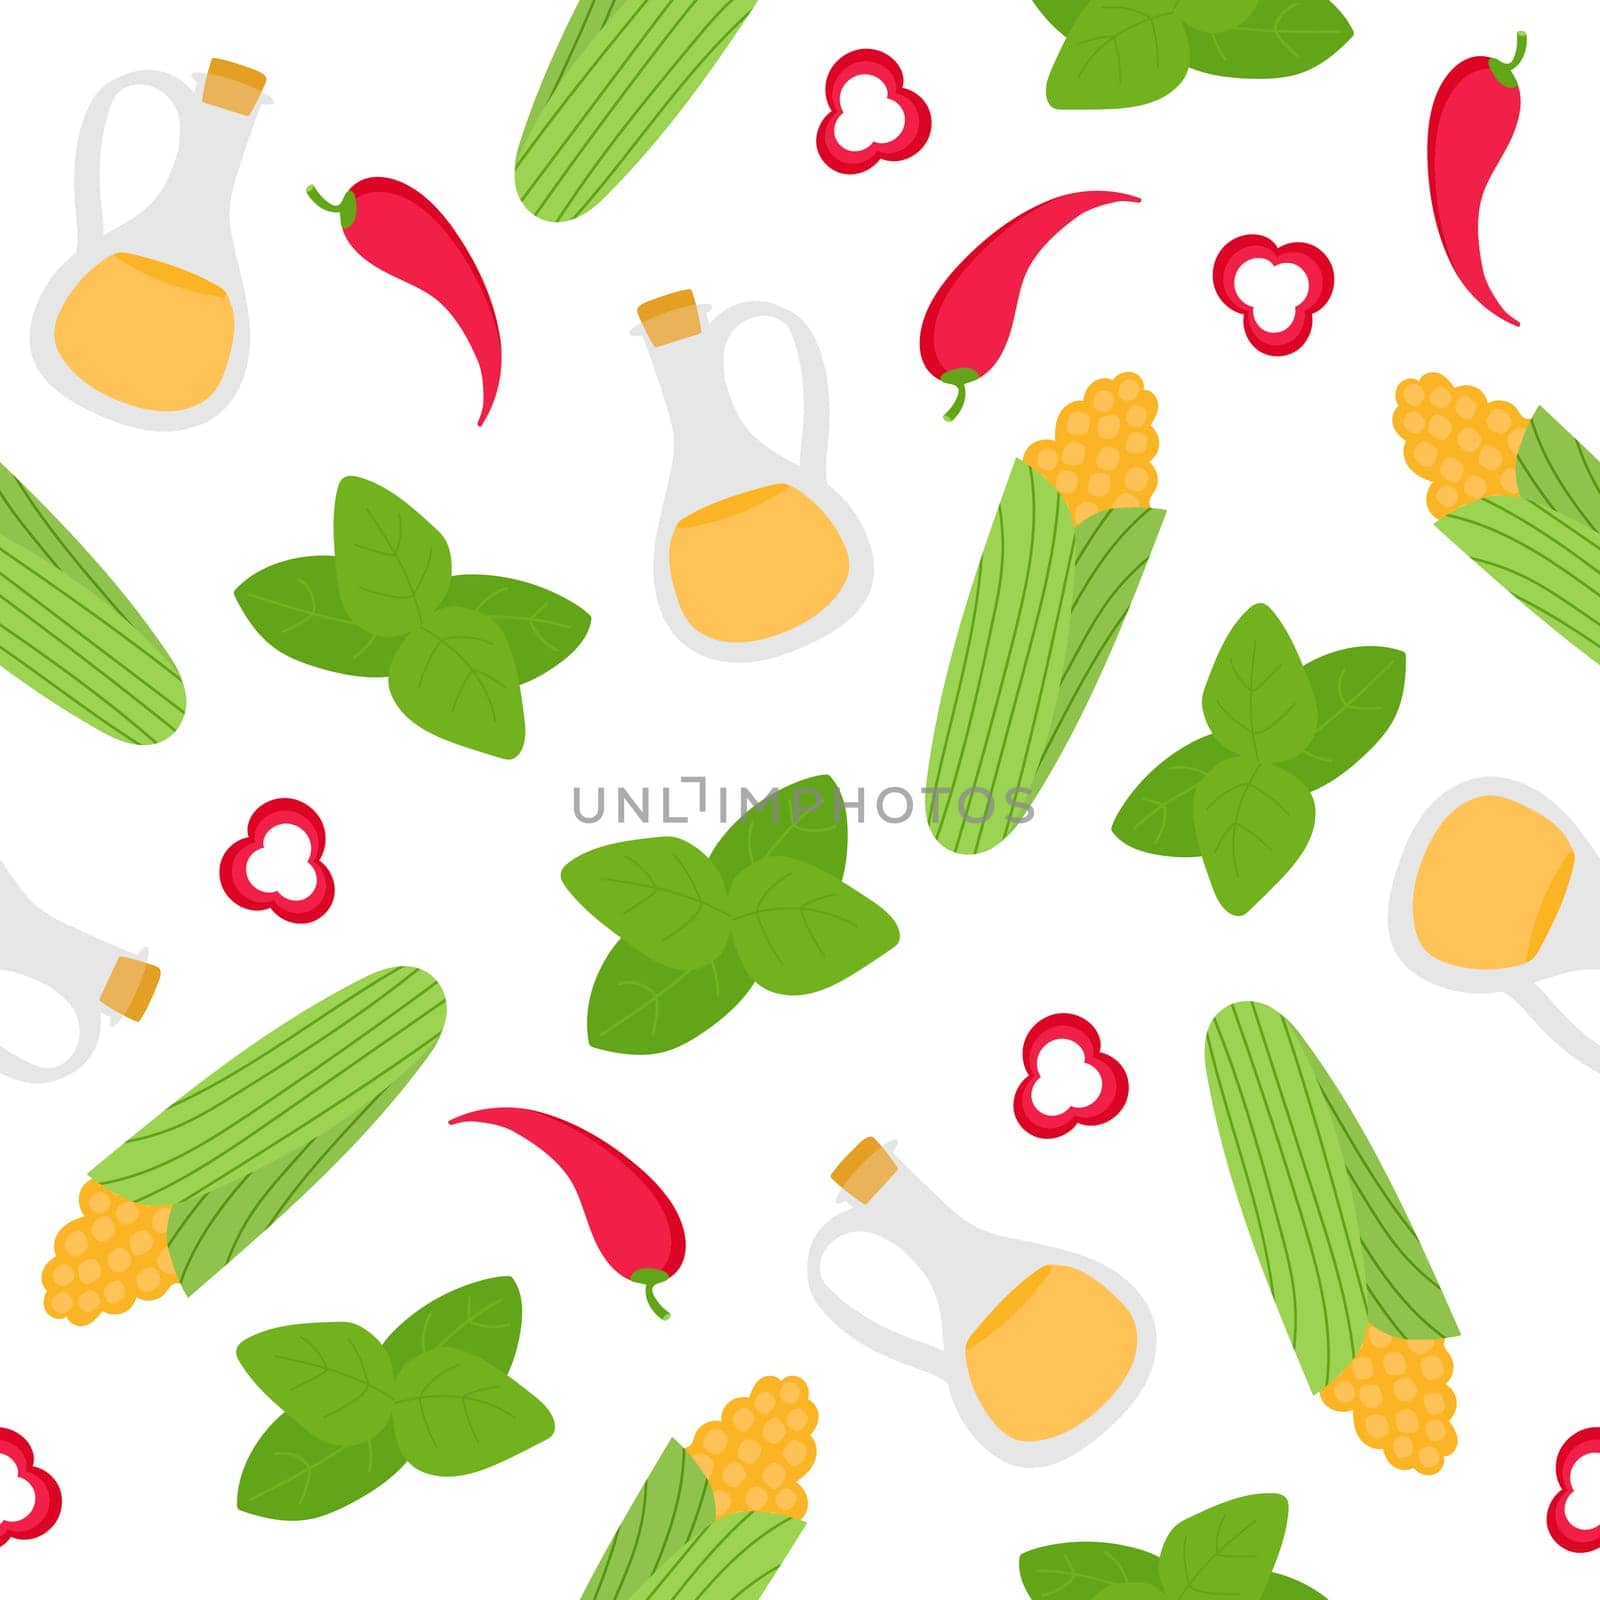 Background with corn, pepper, basil, oil. Ingredients for Mexican cuisine. Seamless pattern on a white background. For cookbook, packaging.